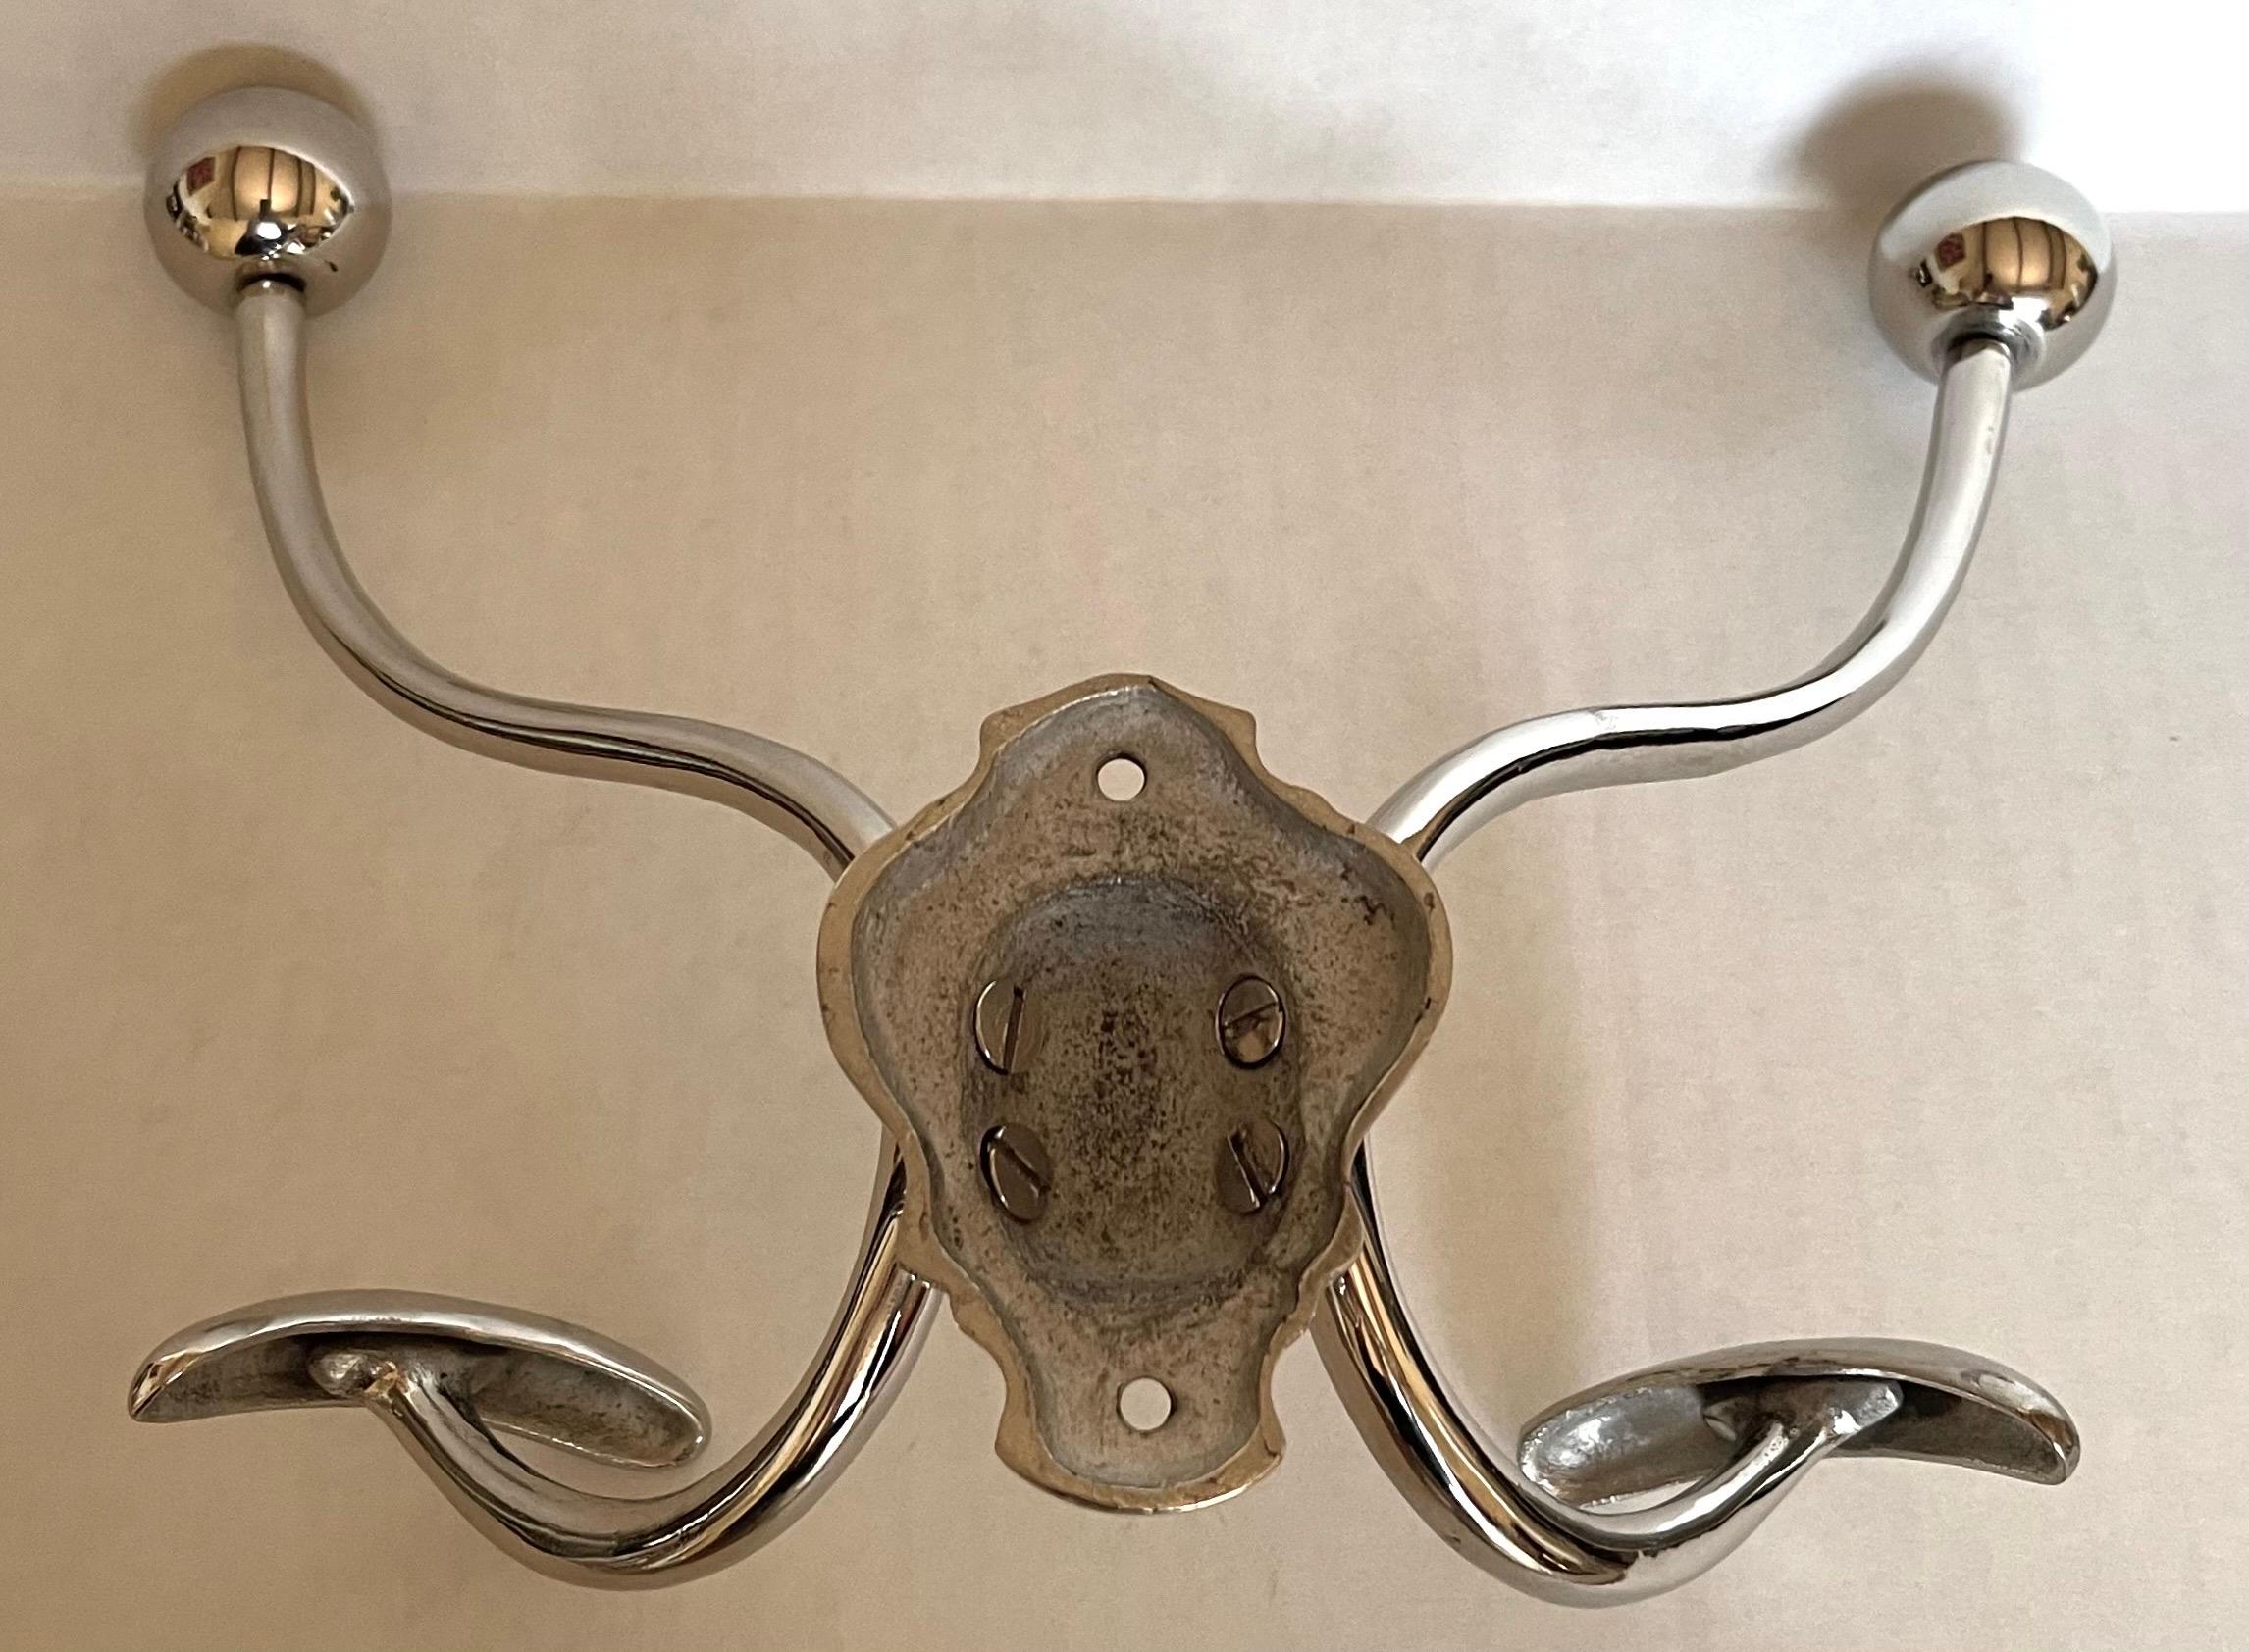 1930s Nickel Two-Arm Coat or Towel Hook In Good Condition For Sale In Stamford, CT